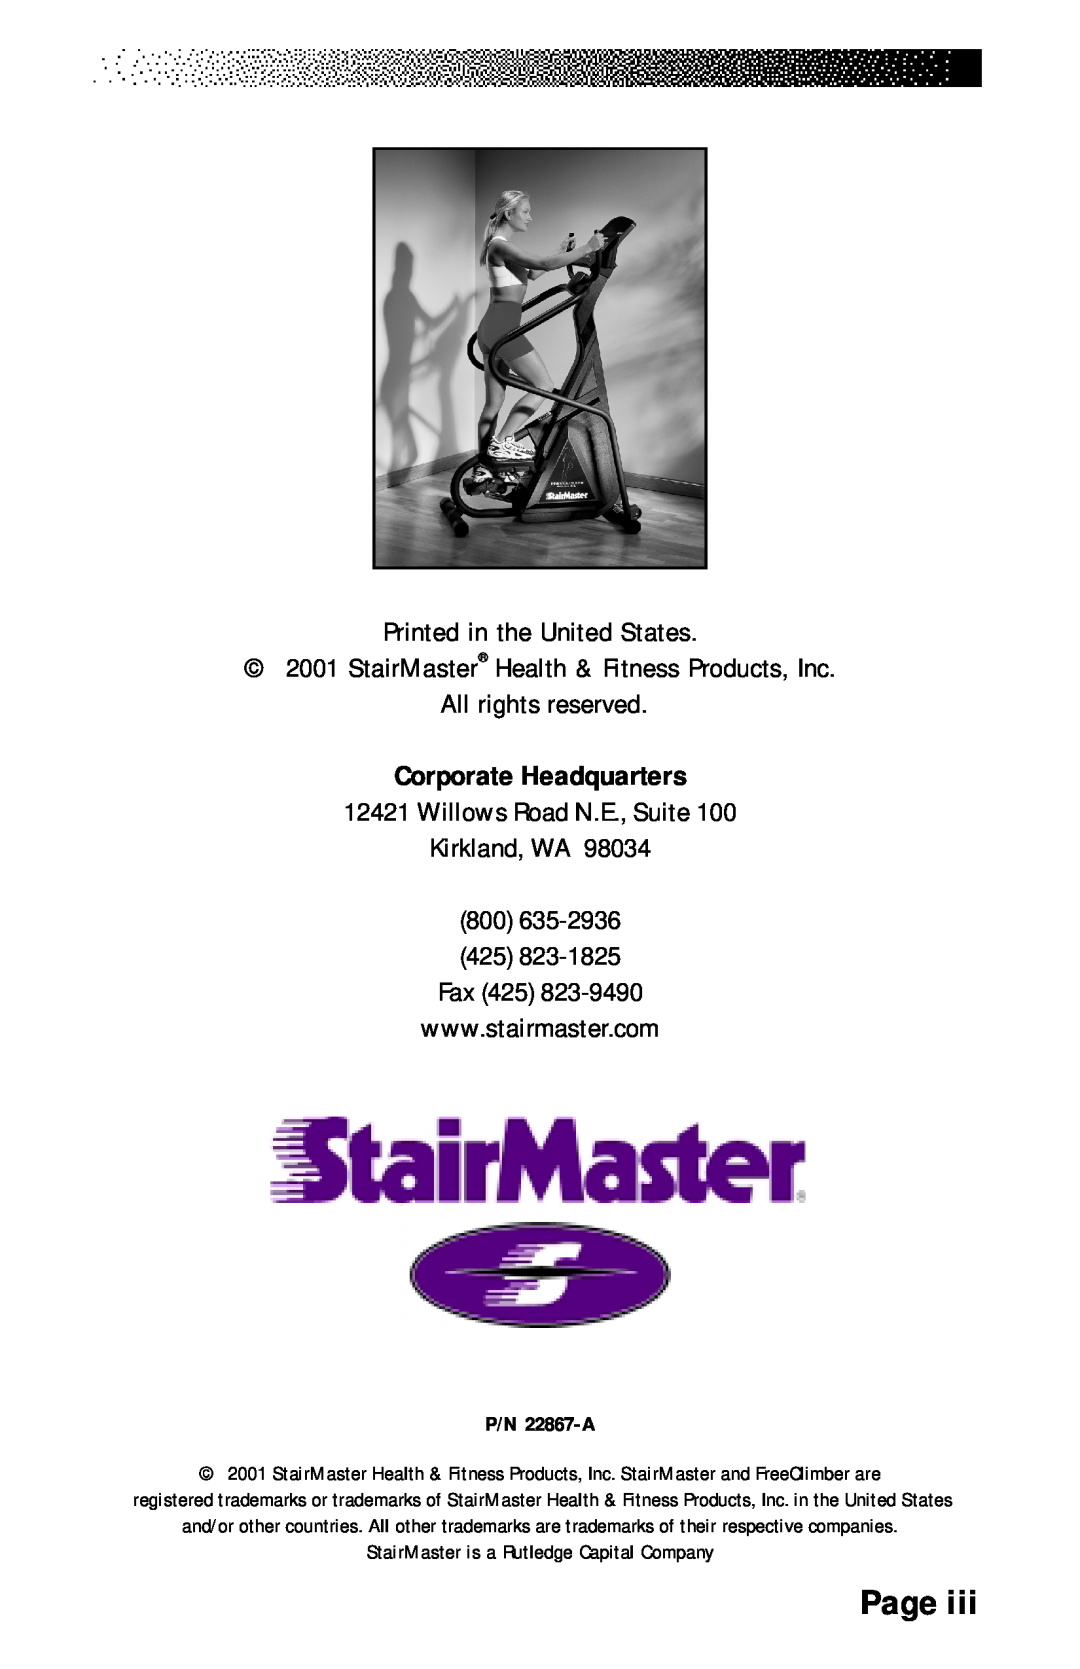 Stairmaster 4400 PT/CL, 4600 PT/CL Page, Corporate Headquarters, P/N 22867-A, StairMaster is a Rutledge Capital Company 